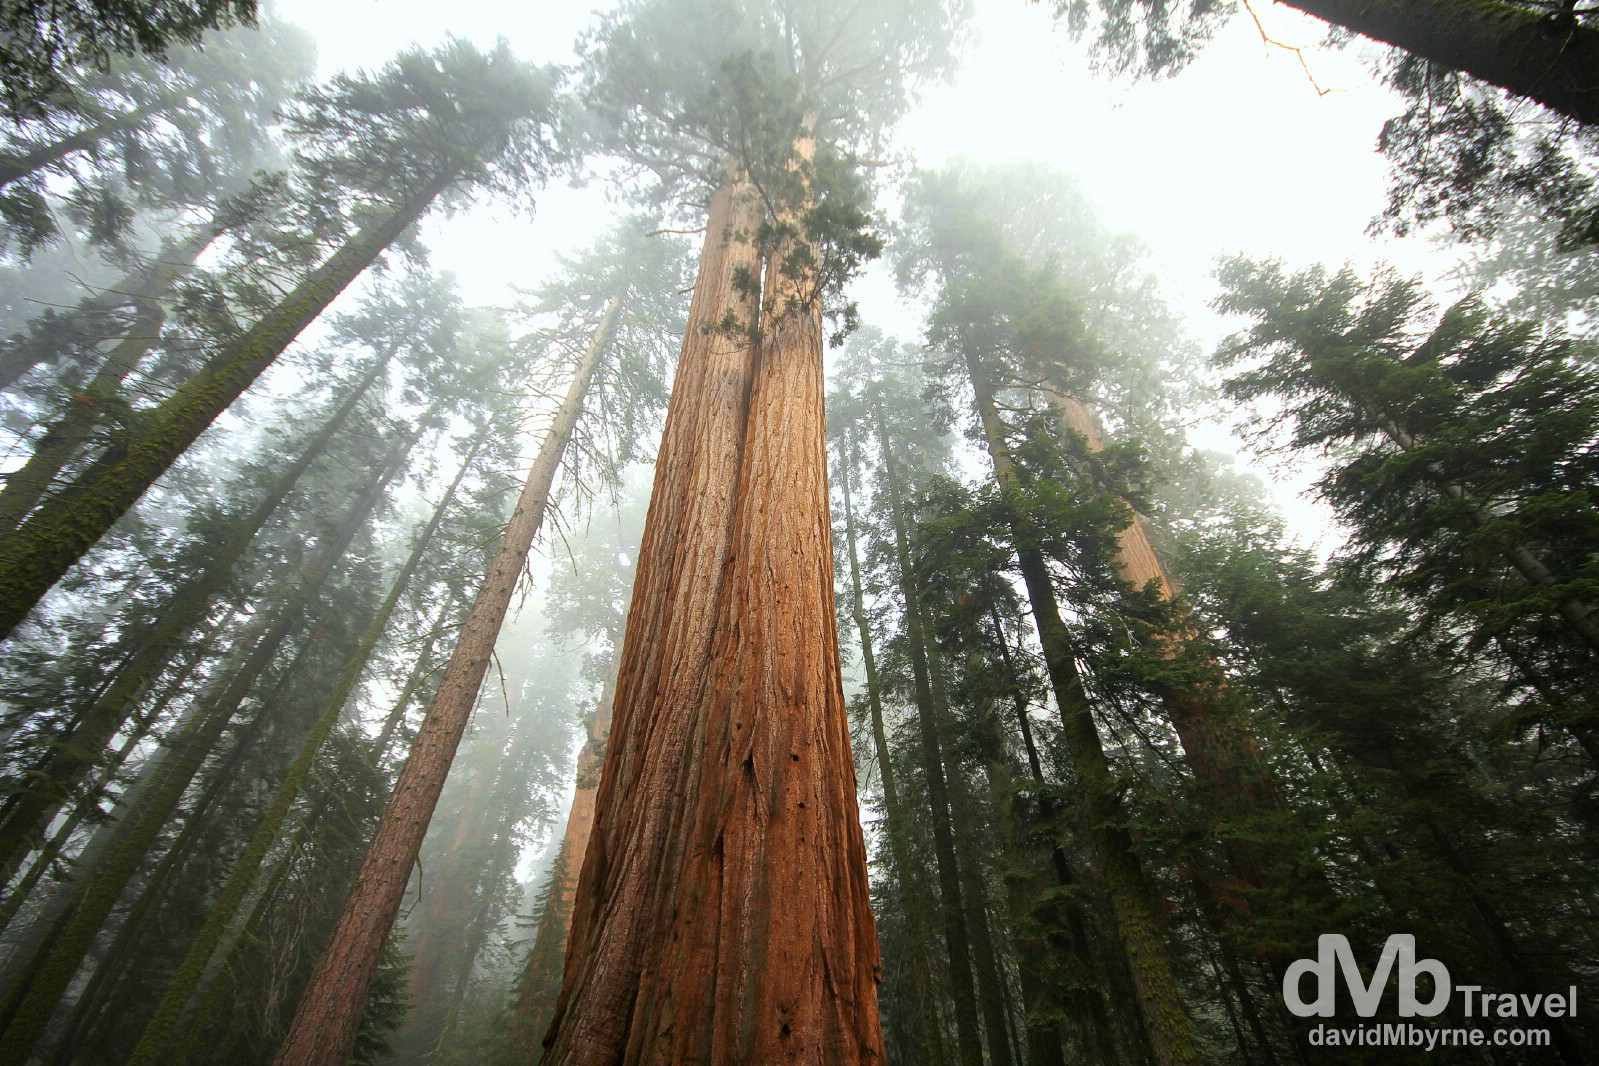 Residents of the Giant Forest of Sequoia National Park, California, USA. April 2nd 2013.